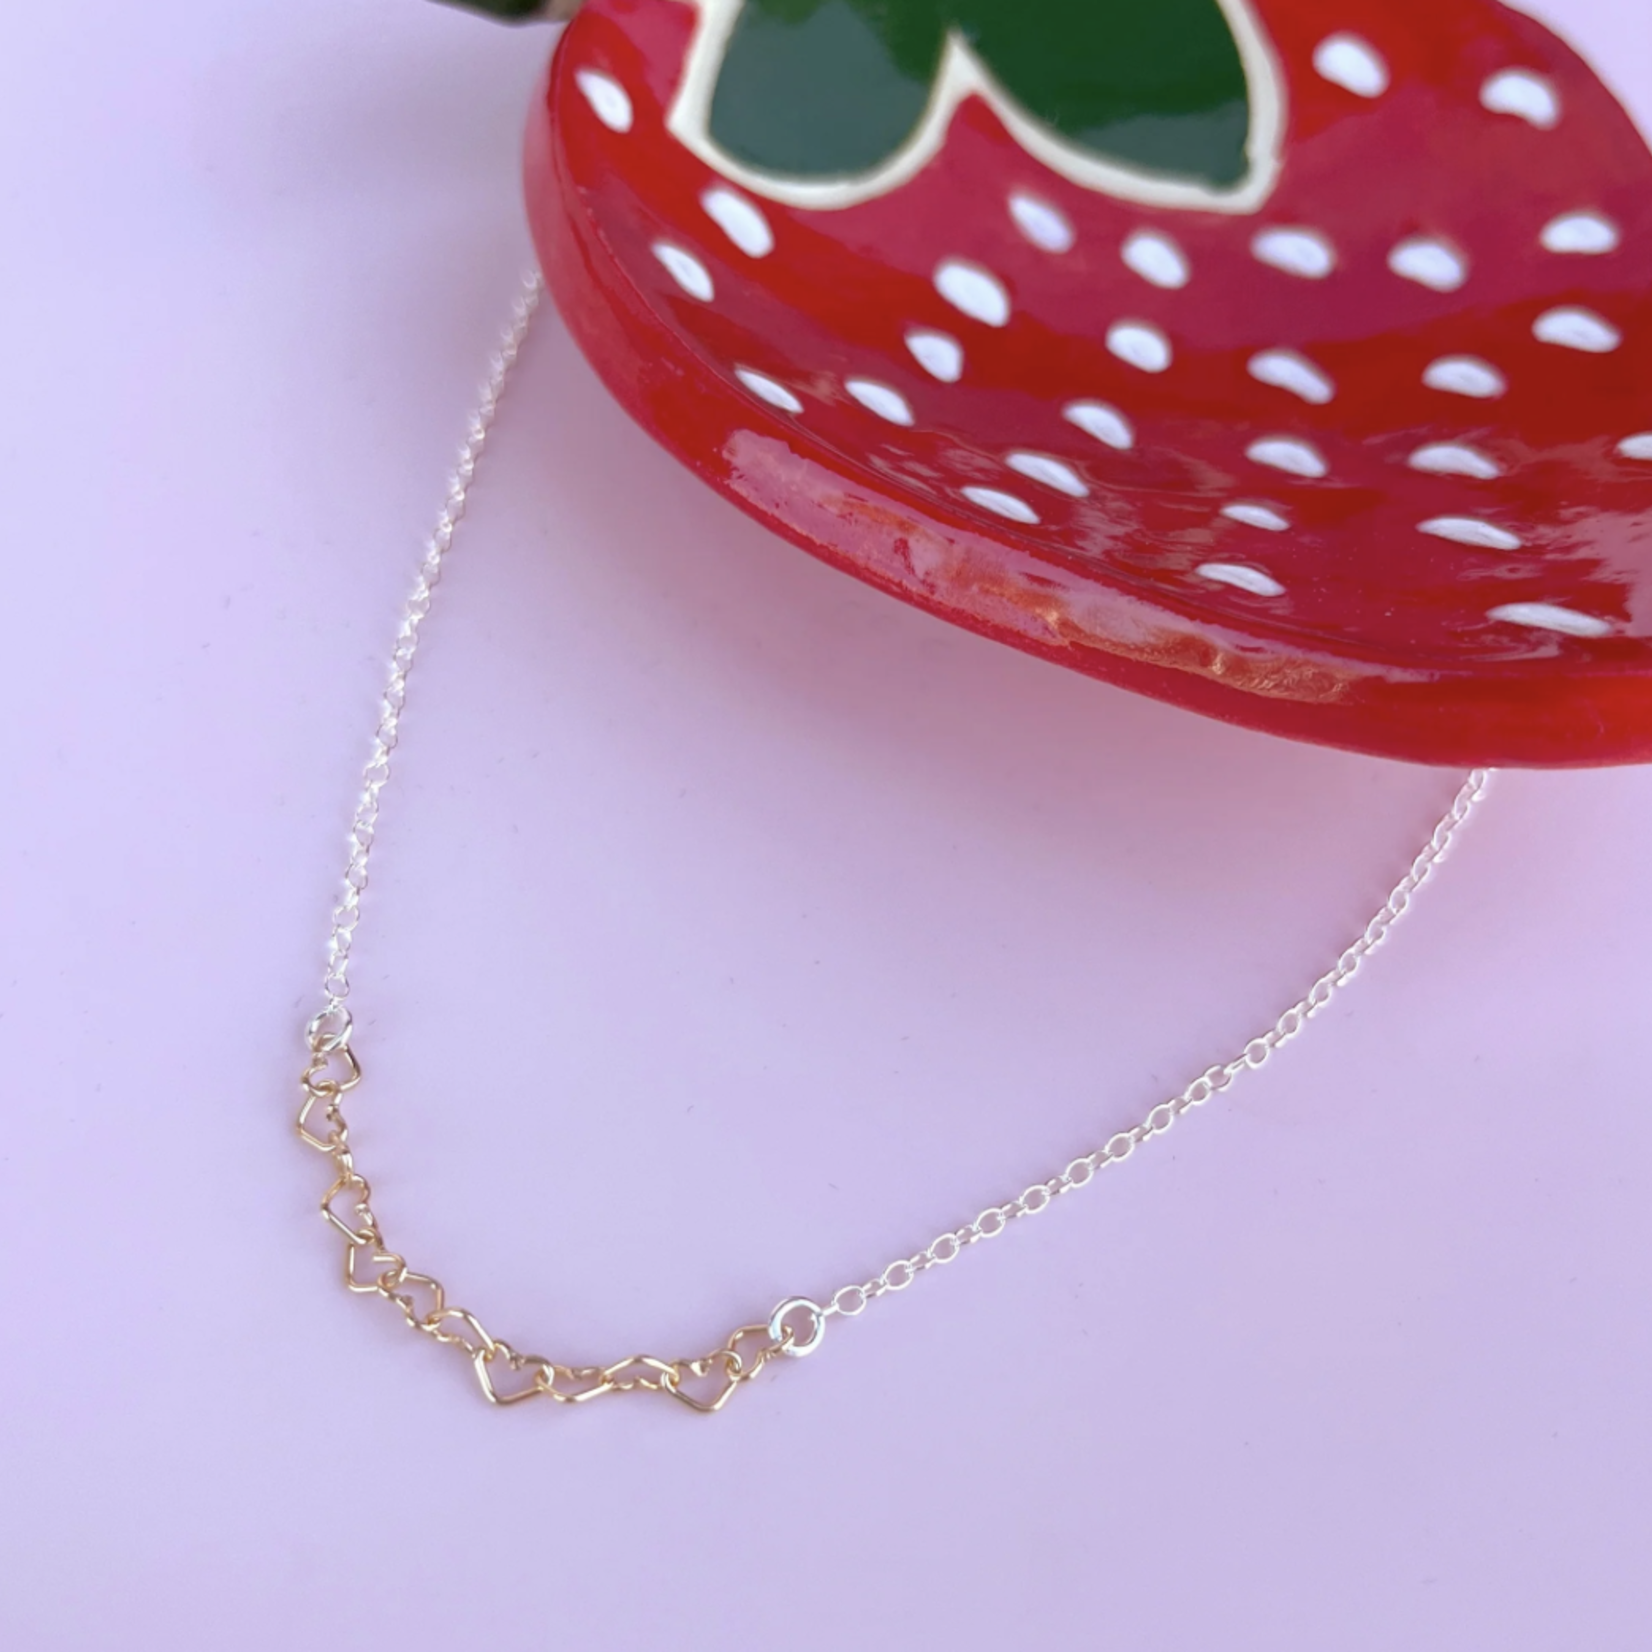 Itsy Bitsy Gold Heart Garland Necklace w/ Silver Chain